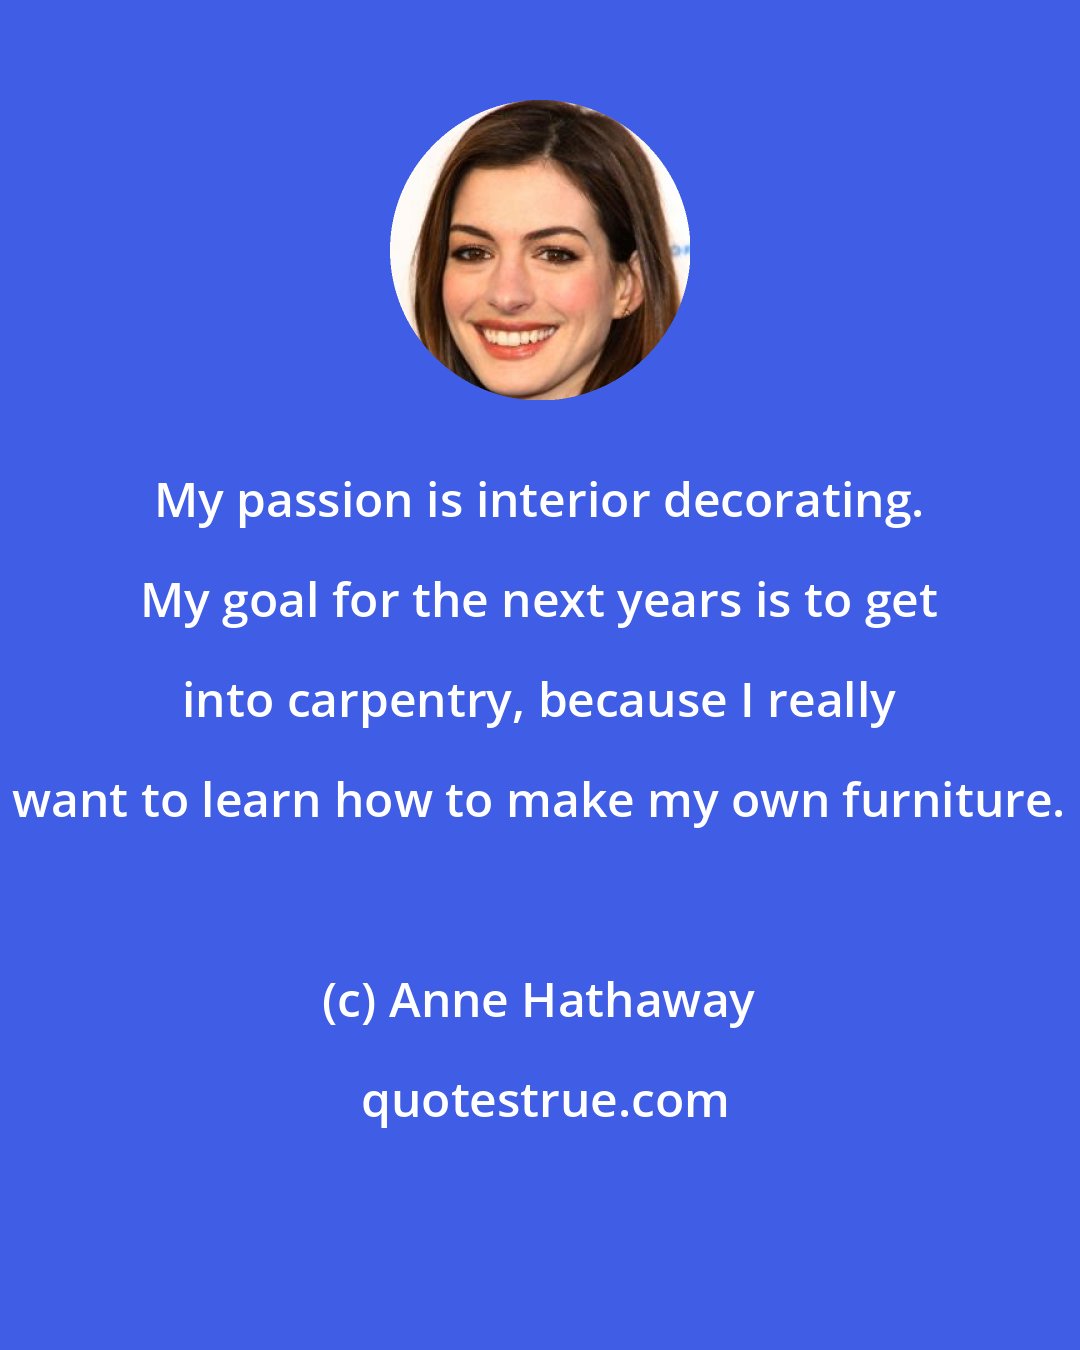 Anne Hathaway: My passion is interior decorating. My goal for the next years is to get into carpentry, because I really want to learn how to make my own furniture.